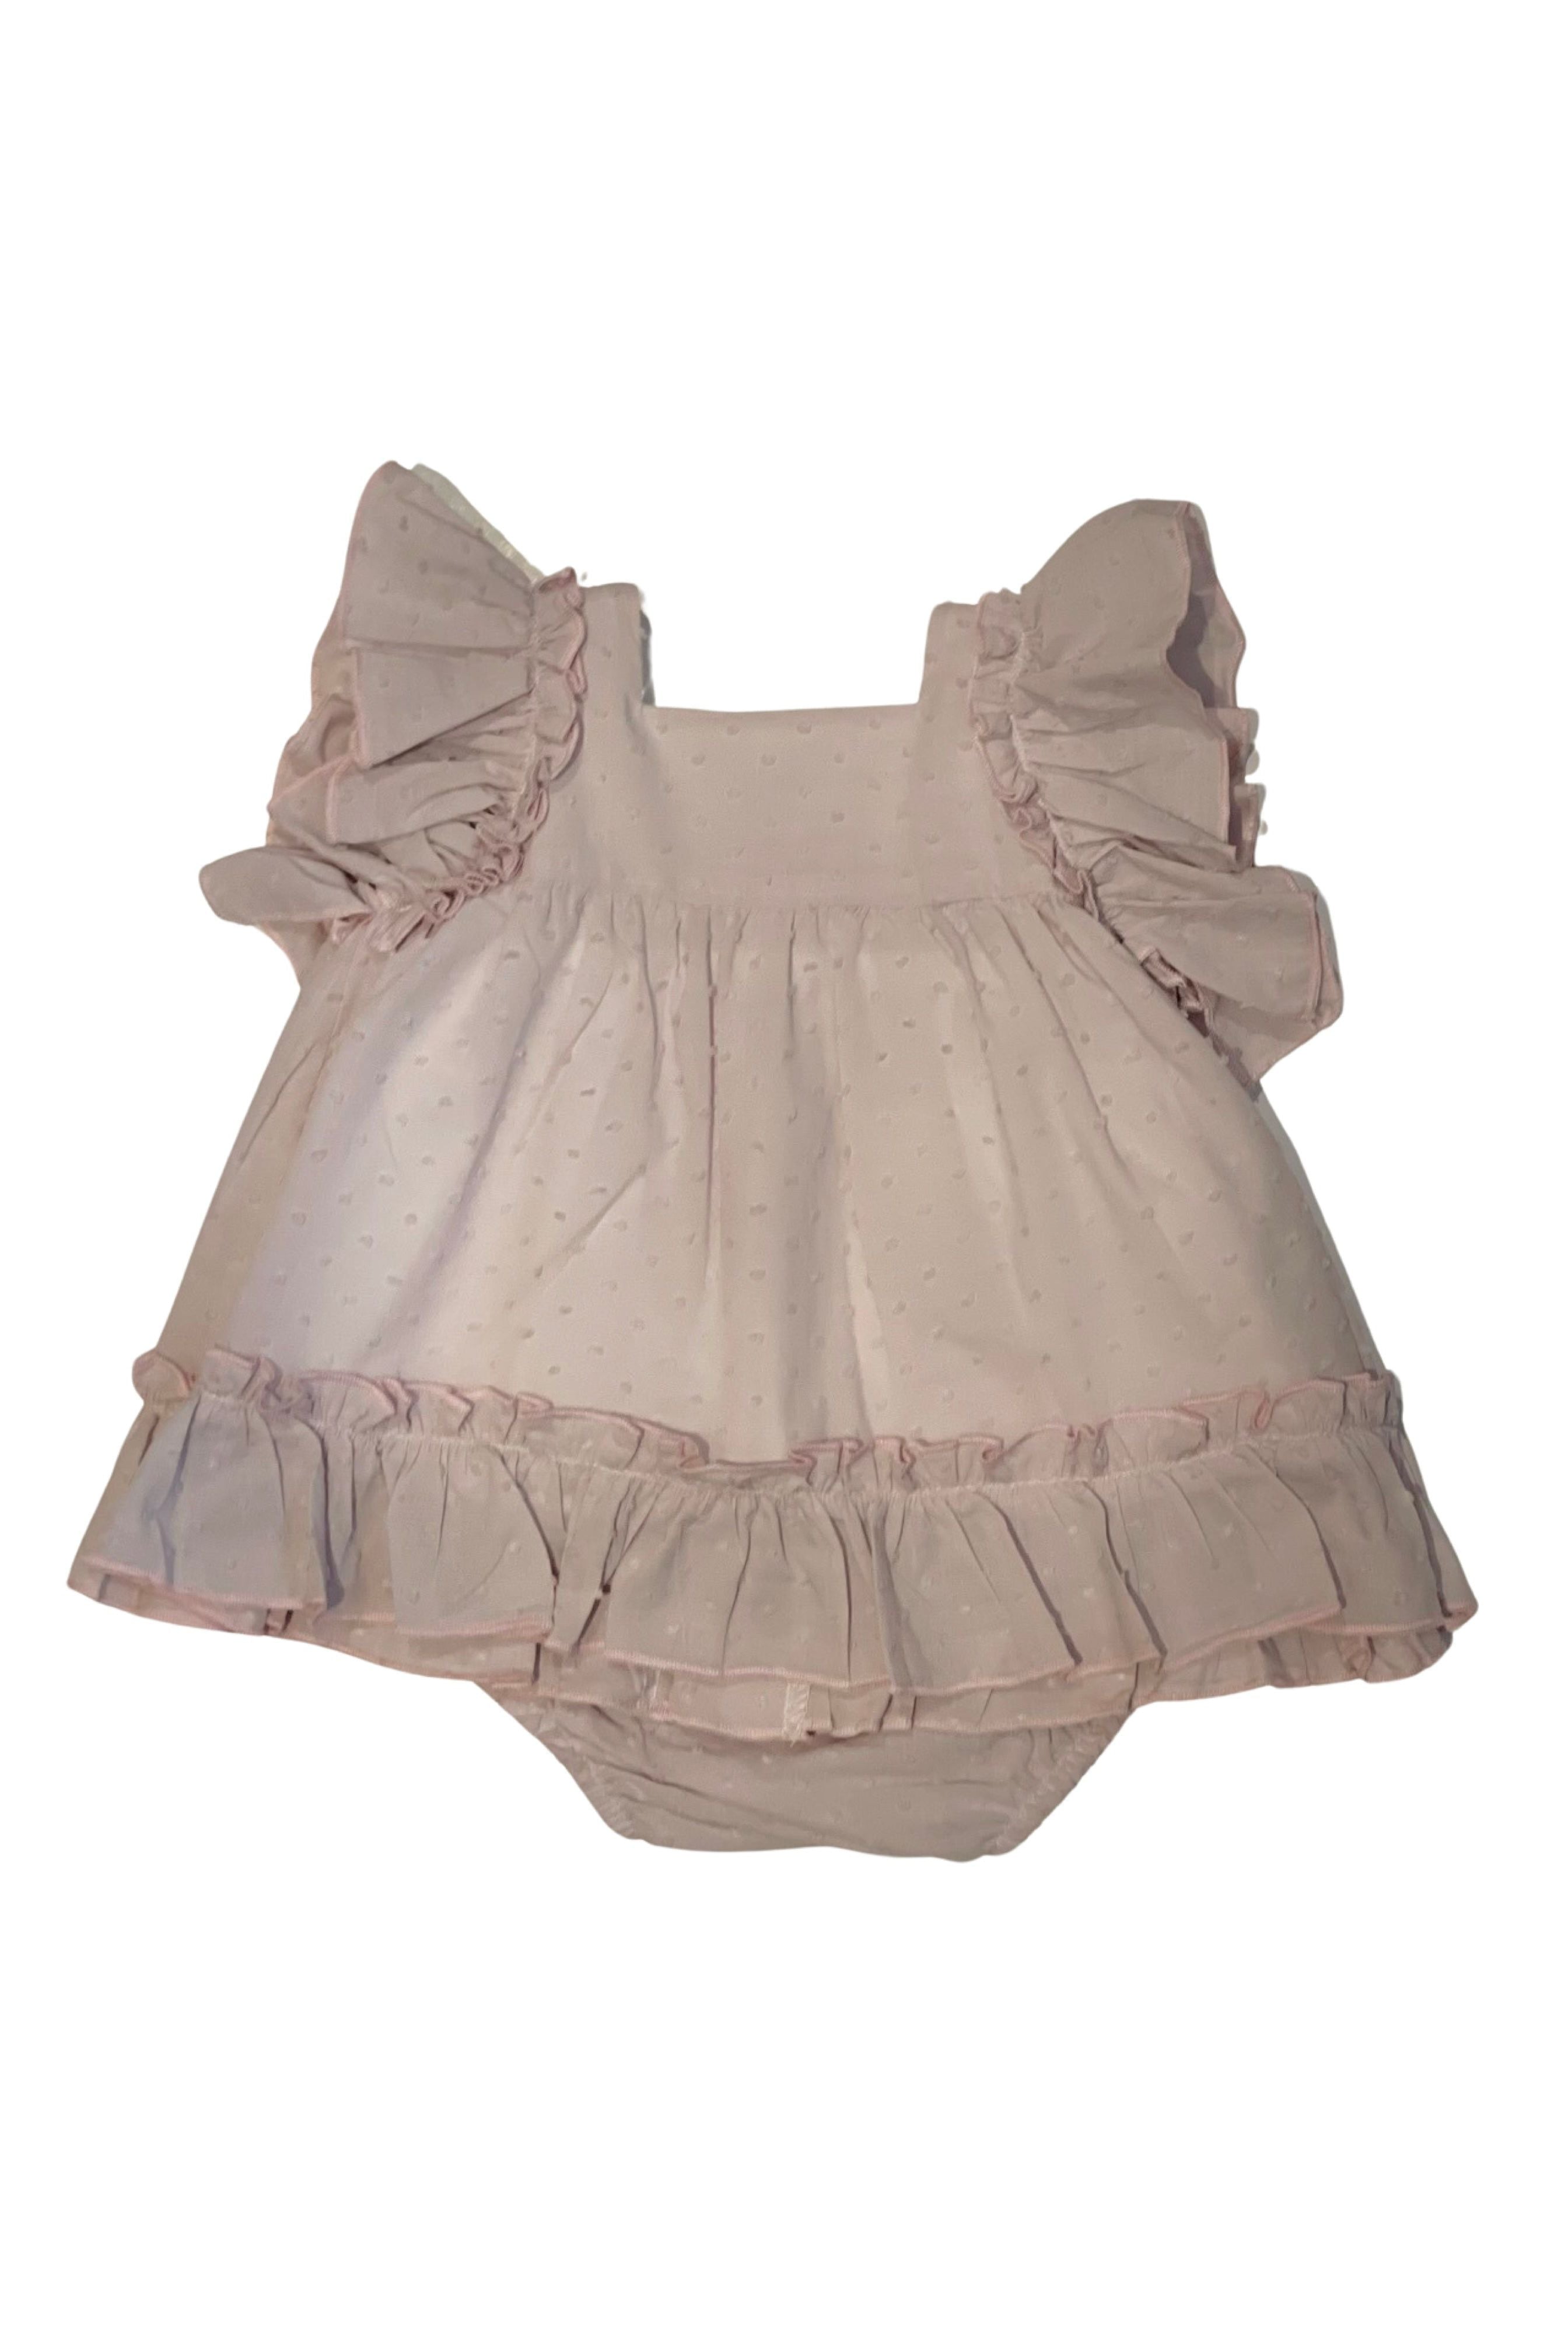 SS24 Lor Miral Baby Girls Lilac Plumitti Dress & Knickers Dainty Delilah